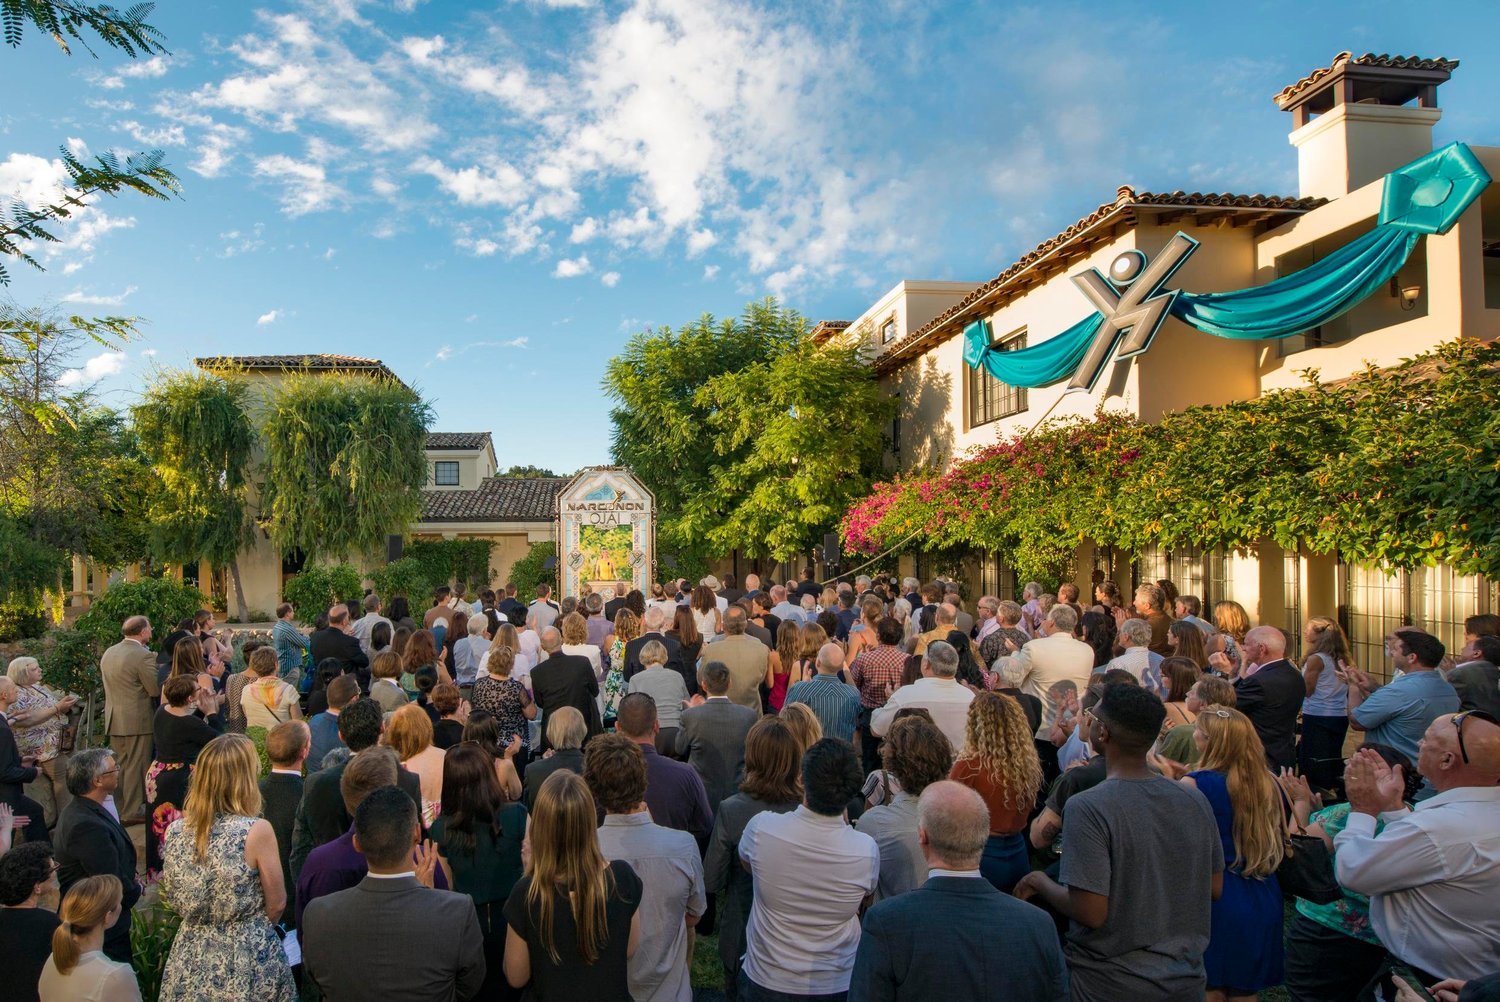 NARCONON SUPPORTERS AND THEIR GUESTS gathered at the exquisite new Narconon center in Ojai, California, Sunday, September 13, to celebrate the opening of the new center.